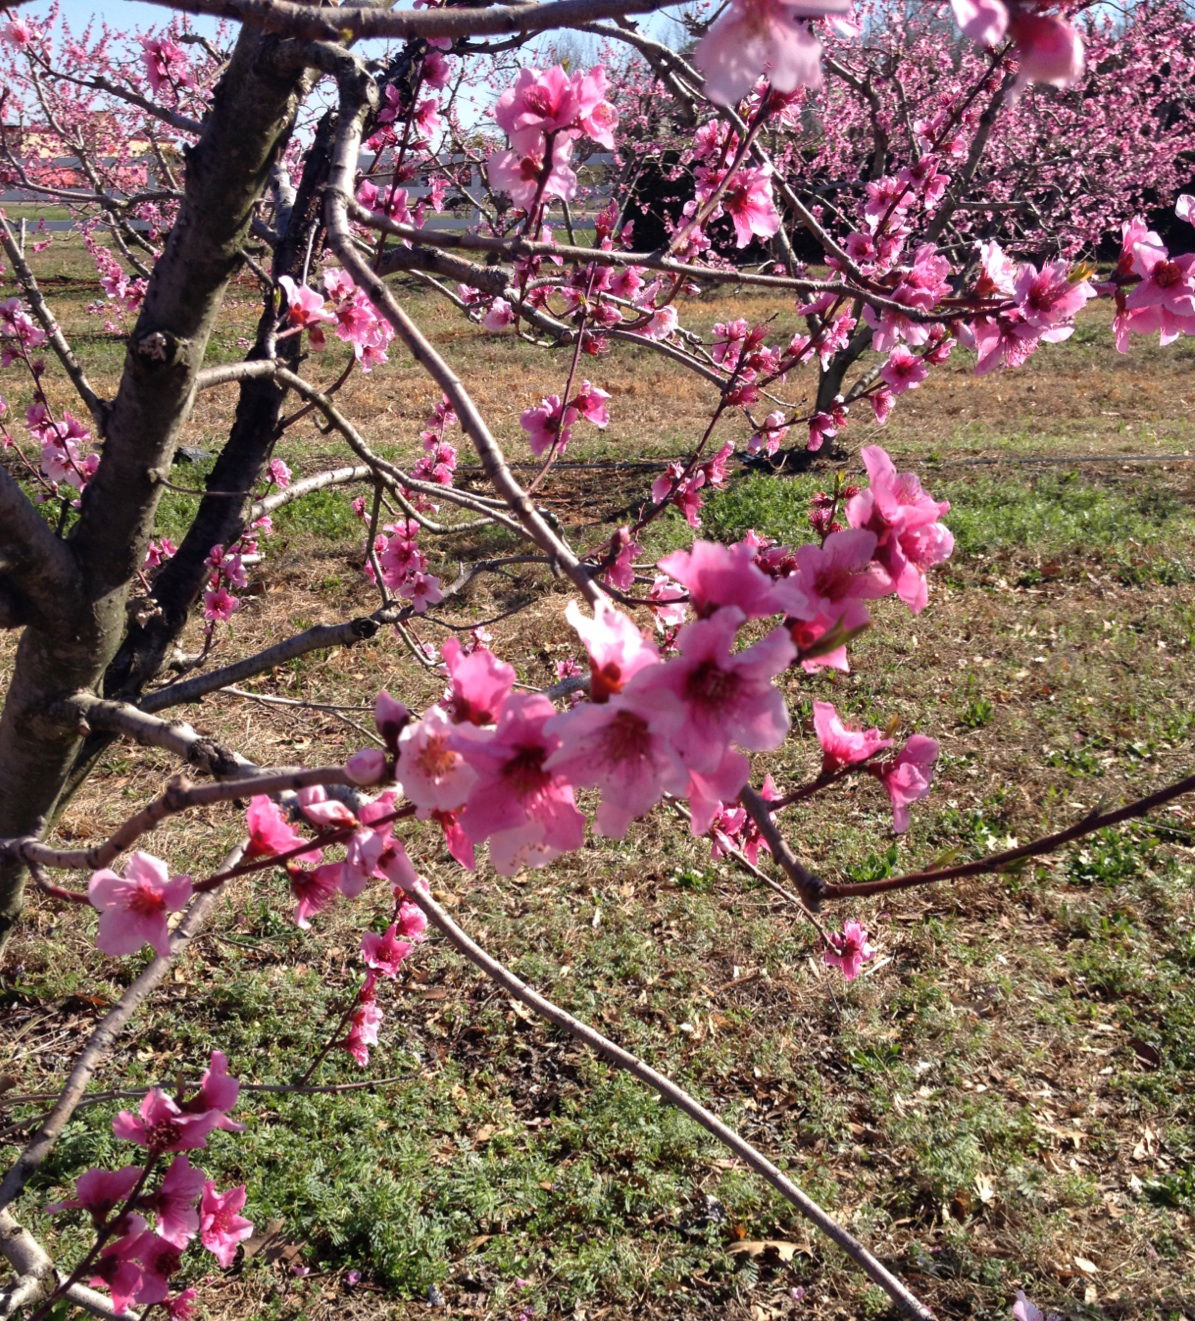 Pink peach blossoms